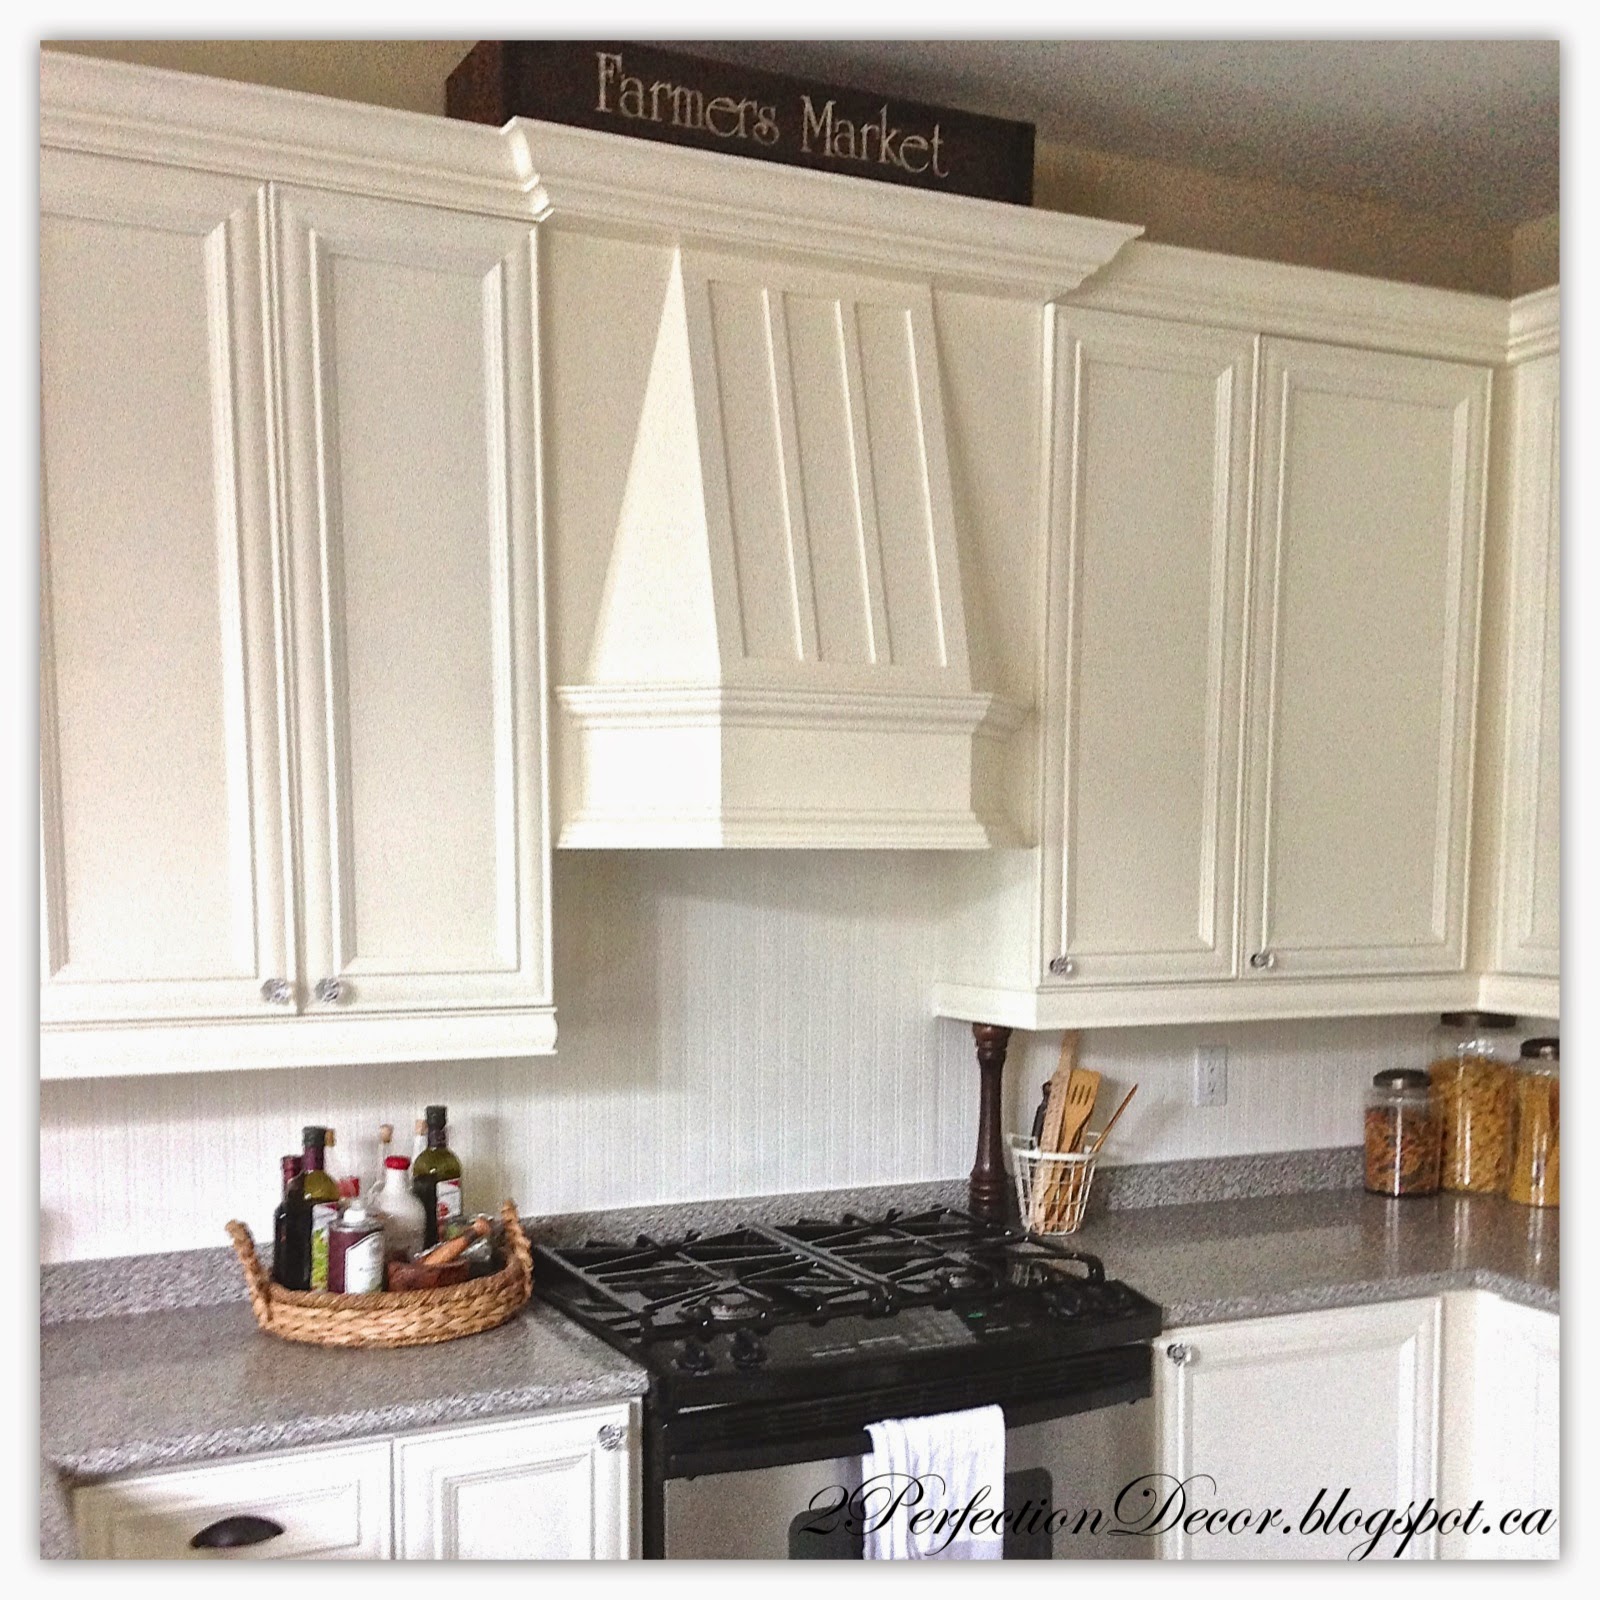 2perfection Decor Painted French Country Kitchen Reveal